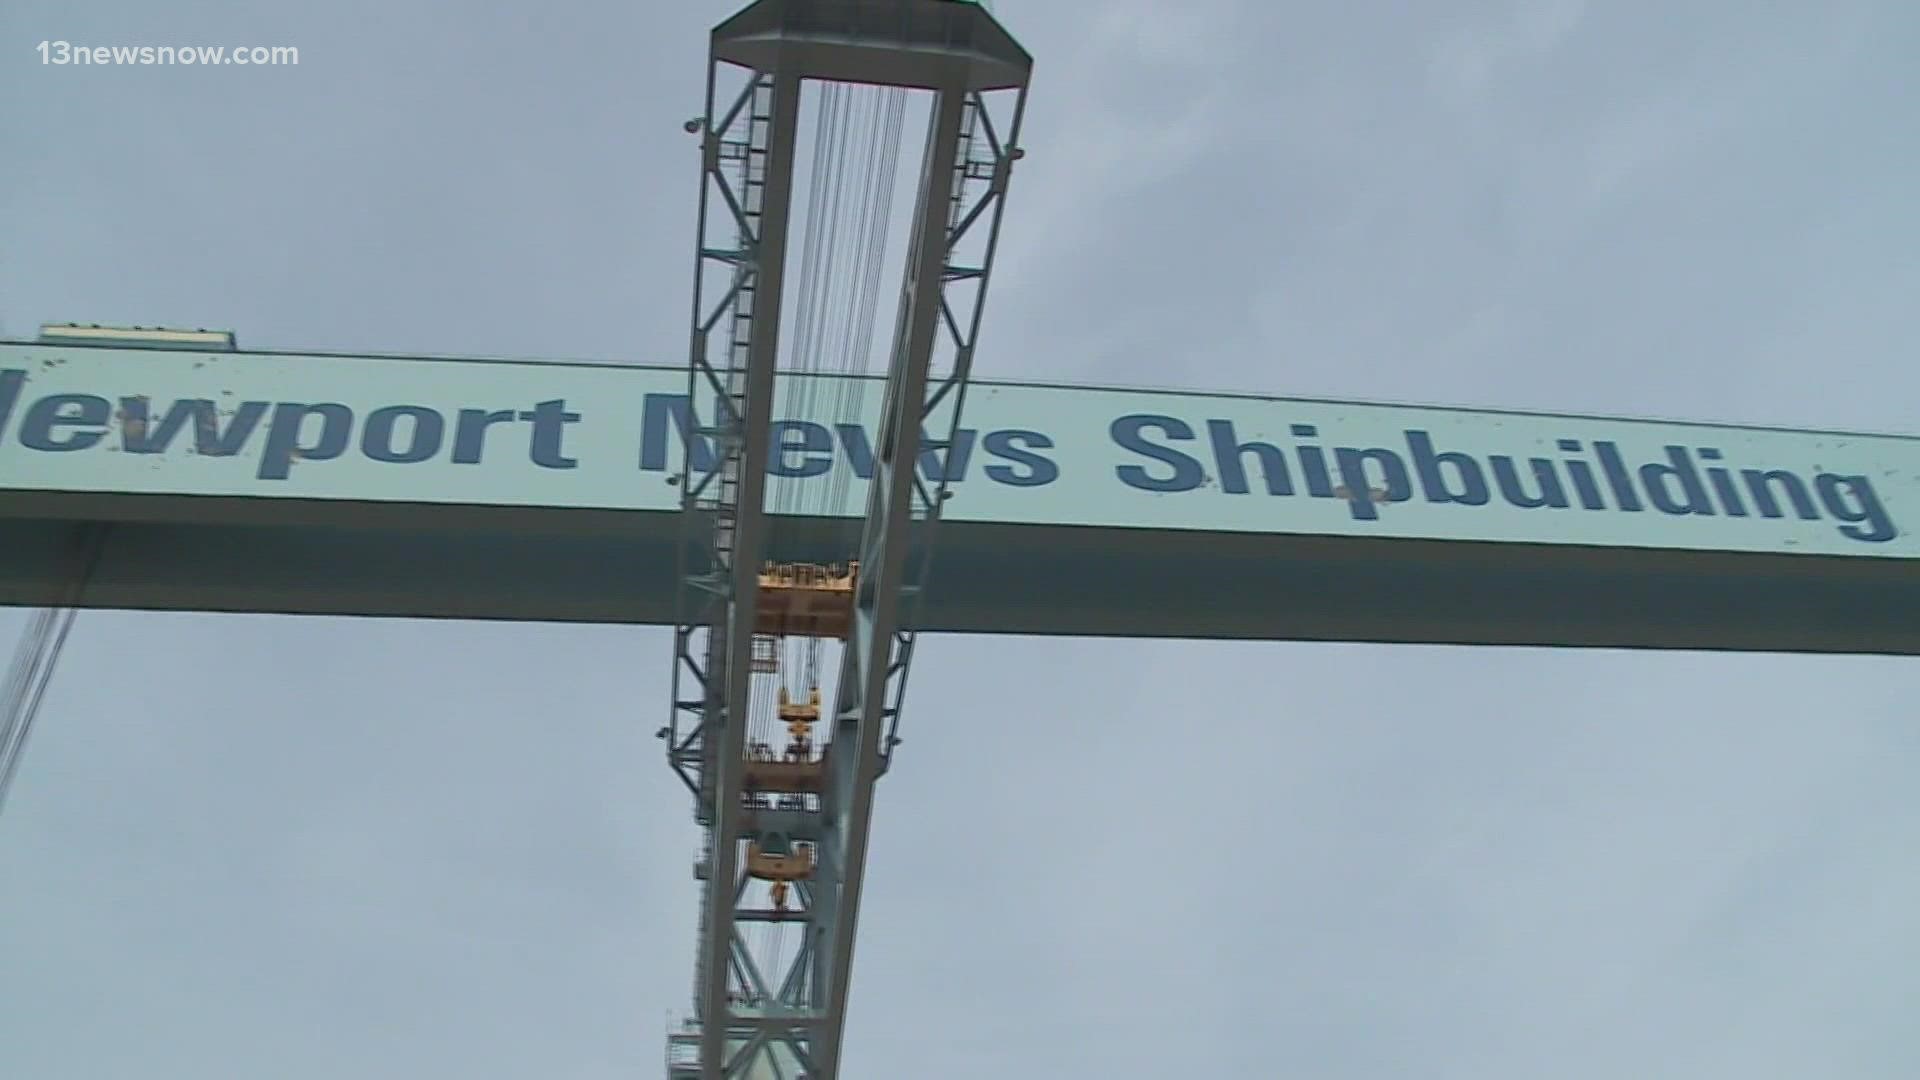 Newport News Shipbuilding's parent company announced the news on its website.